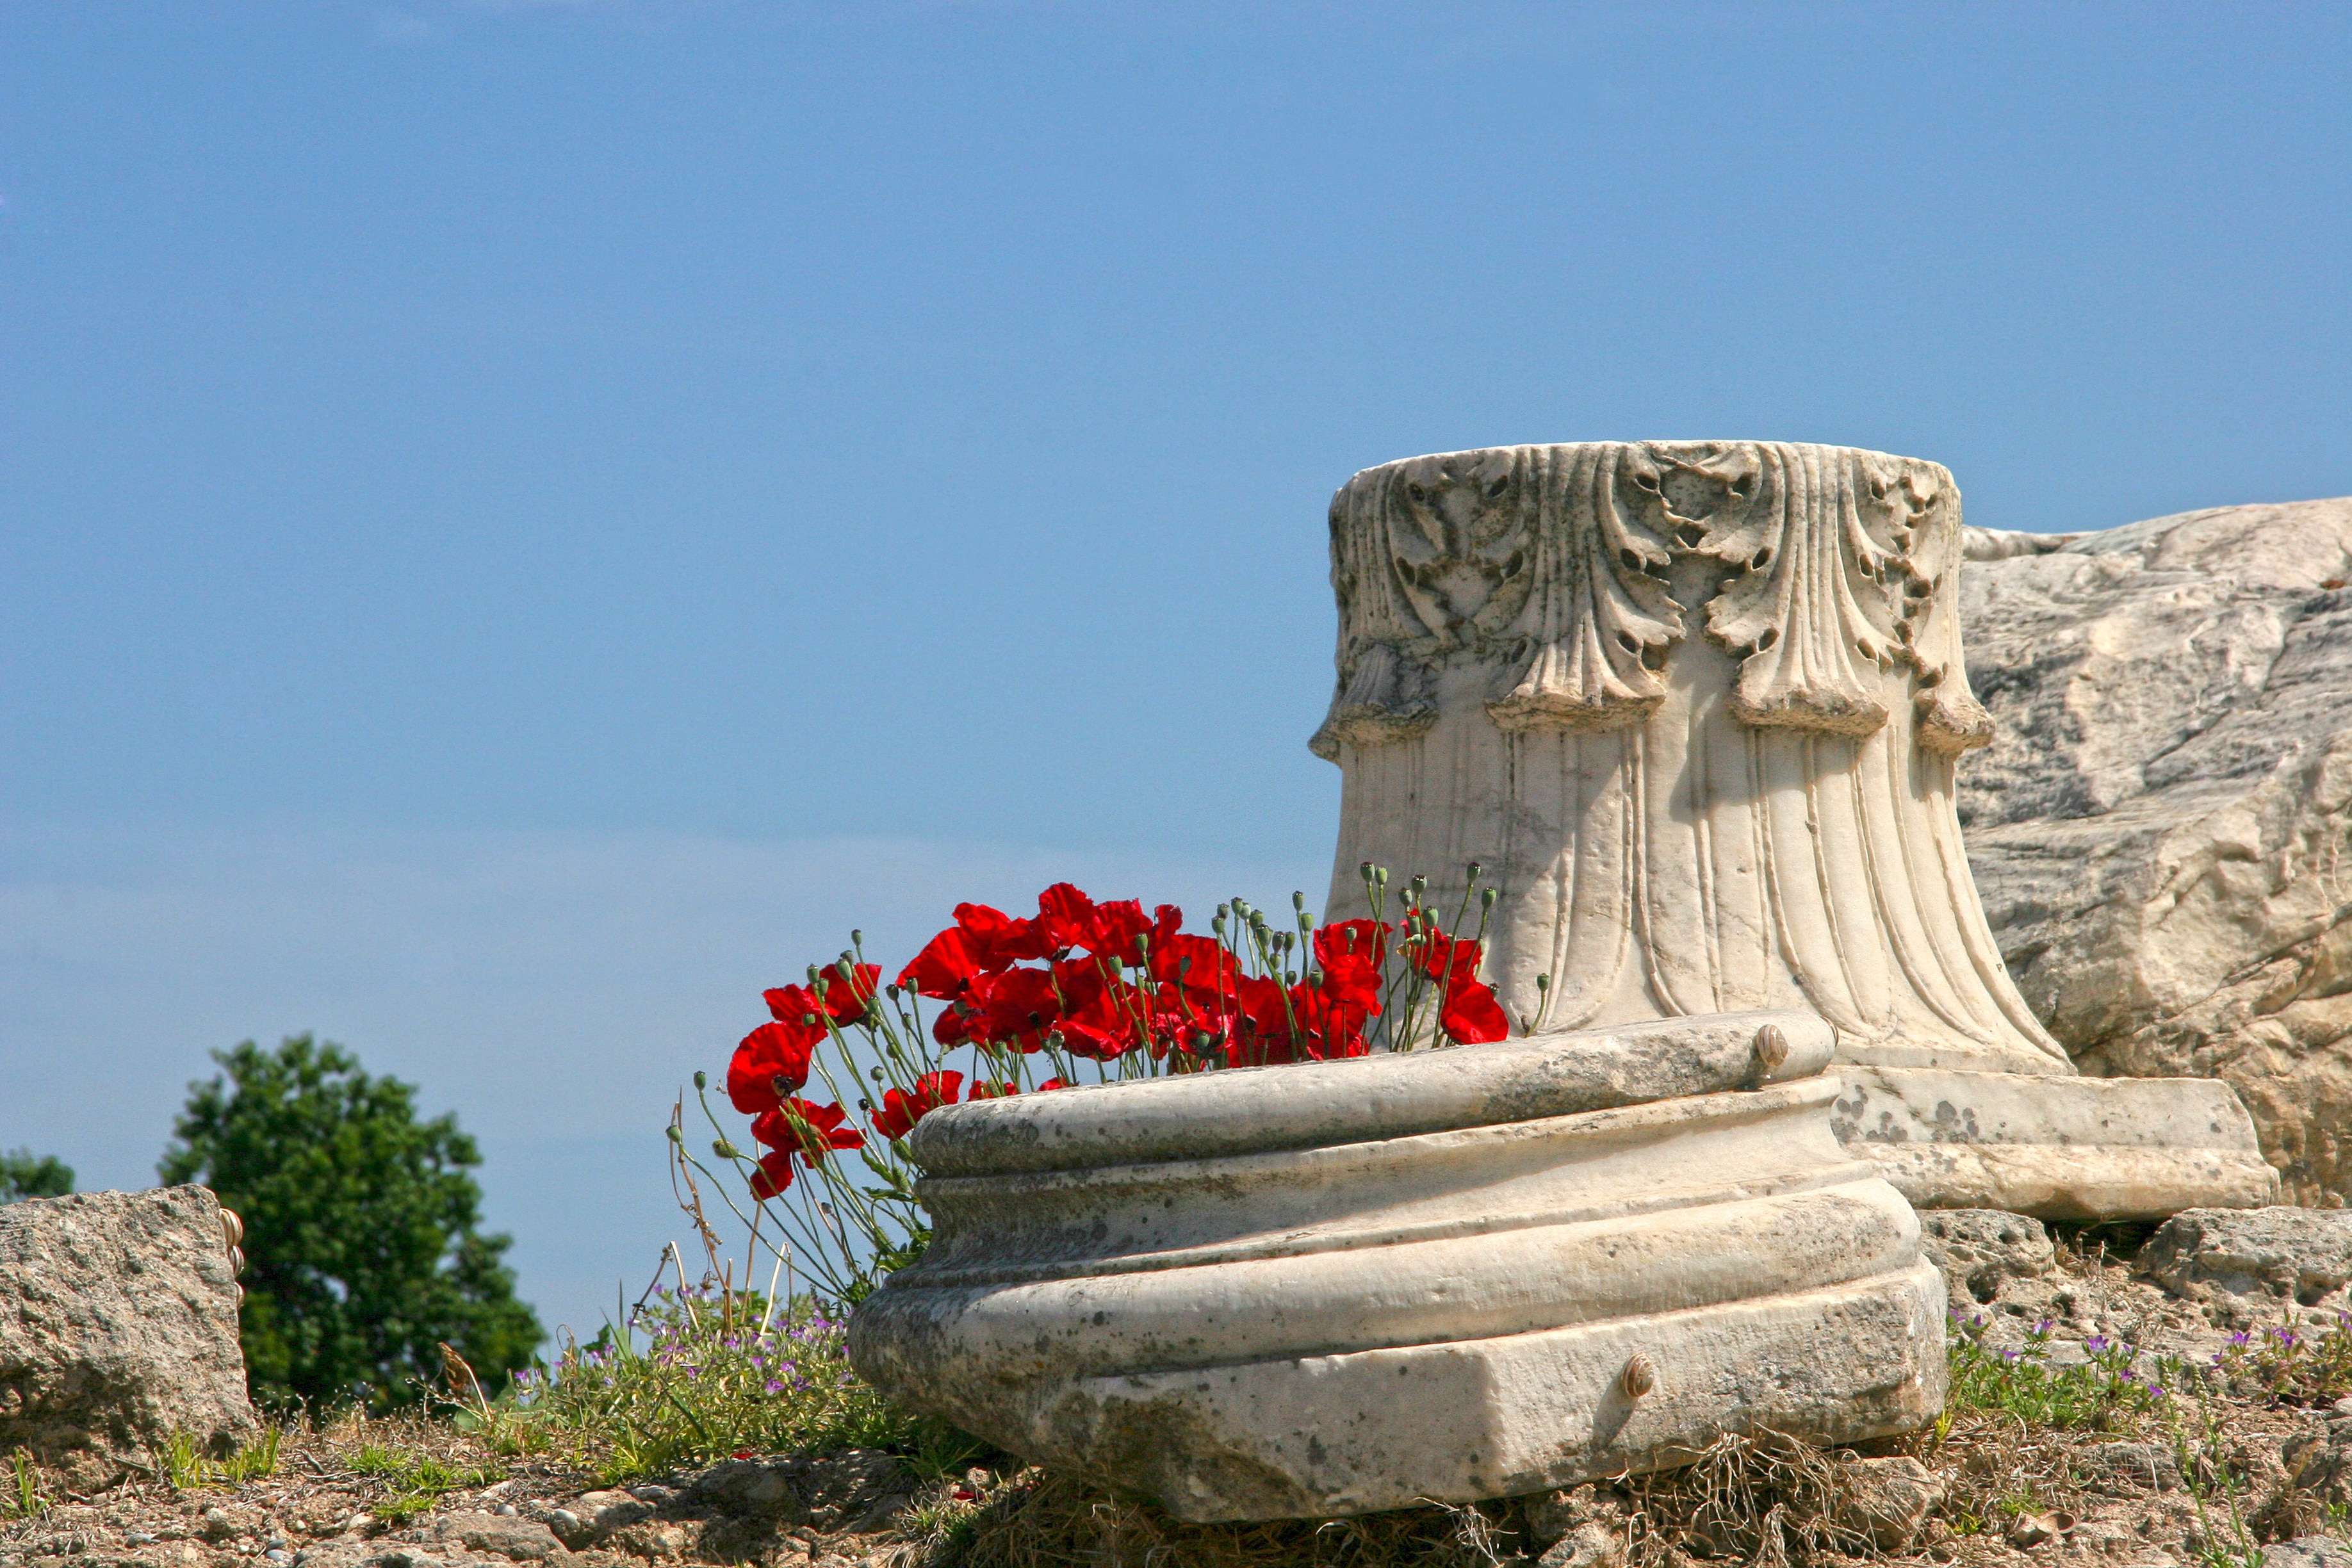 Top of a Corintian marble column with beautiful red poppys growing around it. Ancient Corinth, Greece.